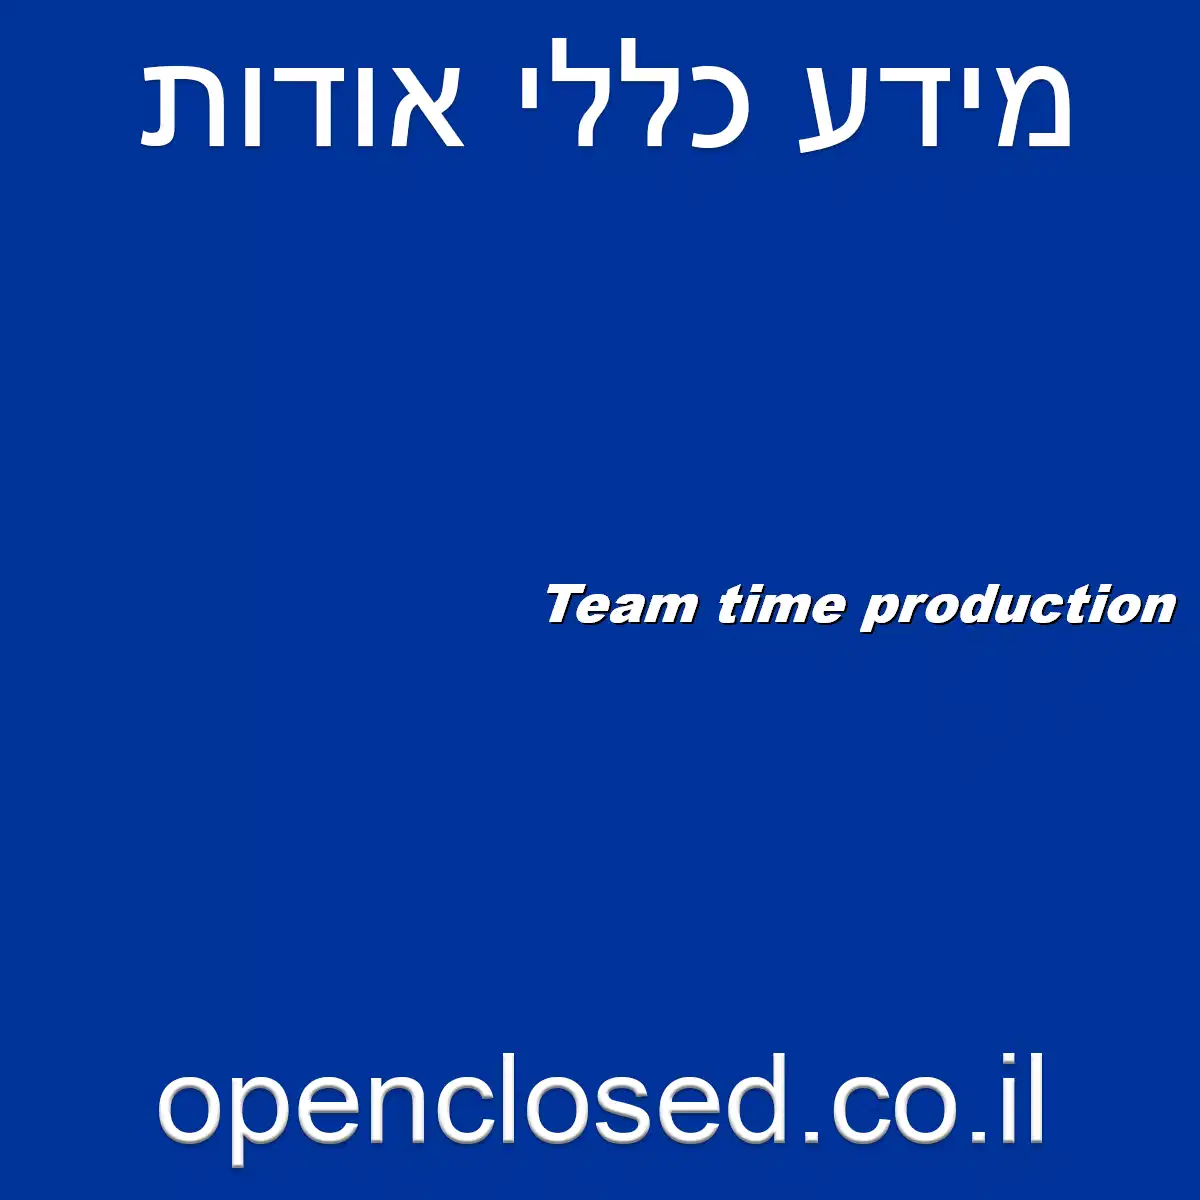 Team time production